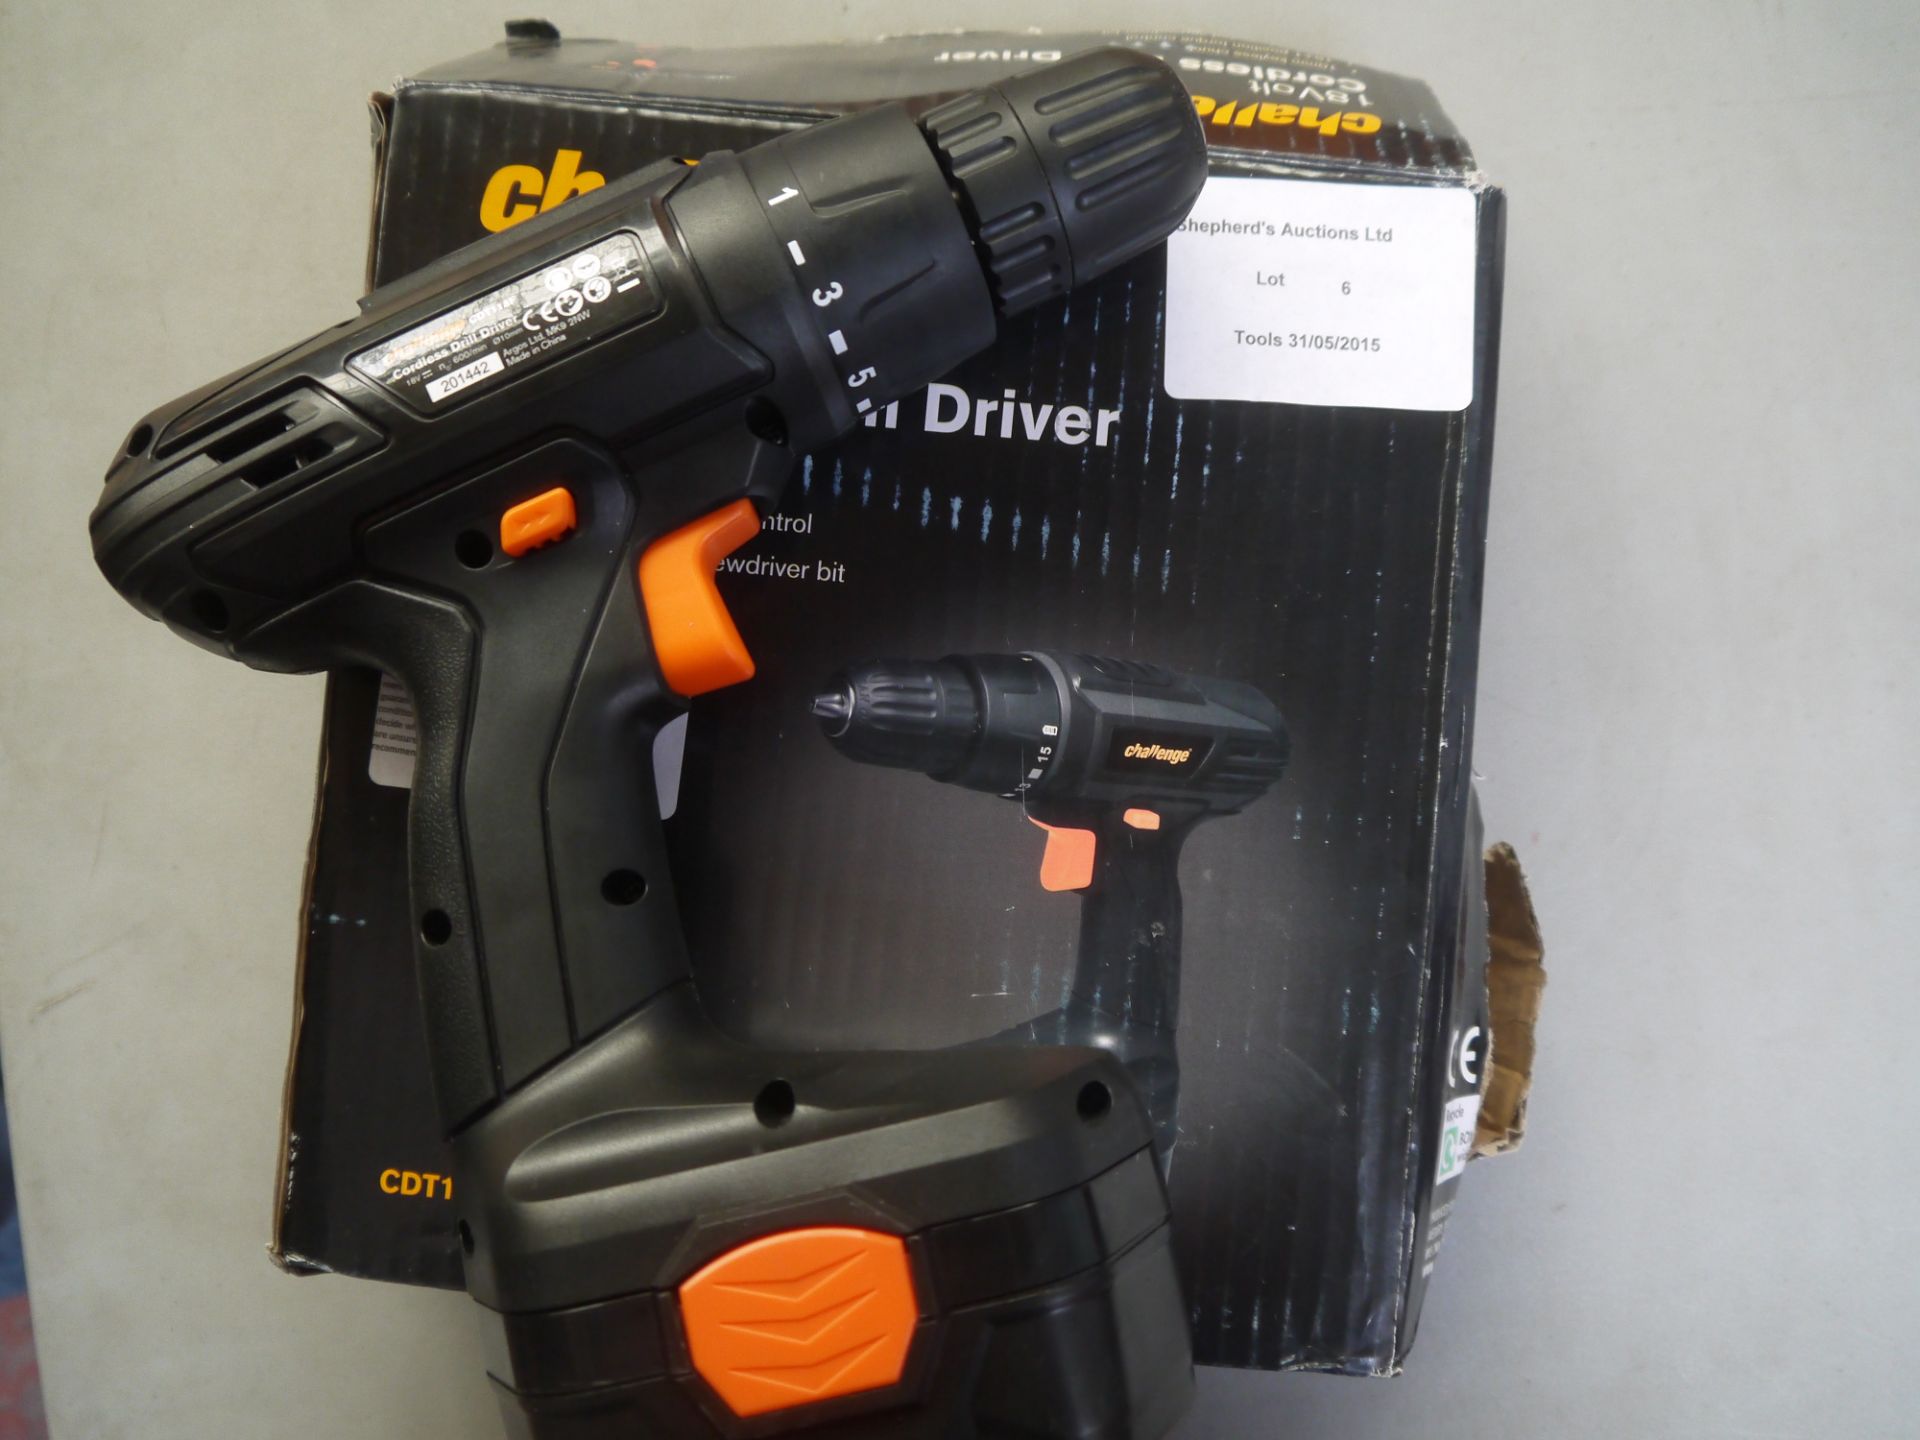 Challenge 18V Cordless Drill Driver. Tested working and boxed.